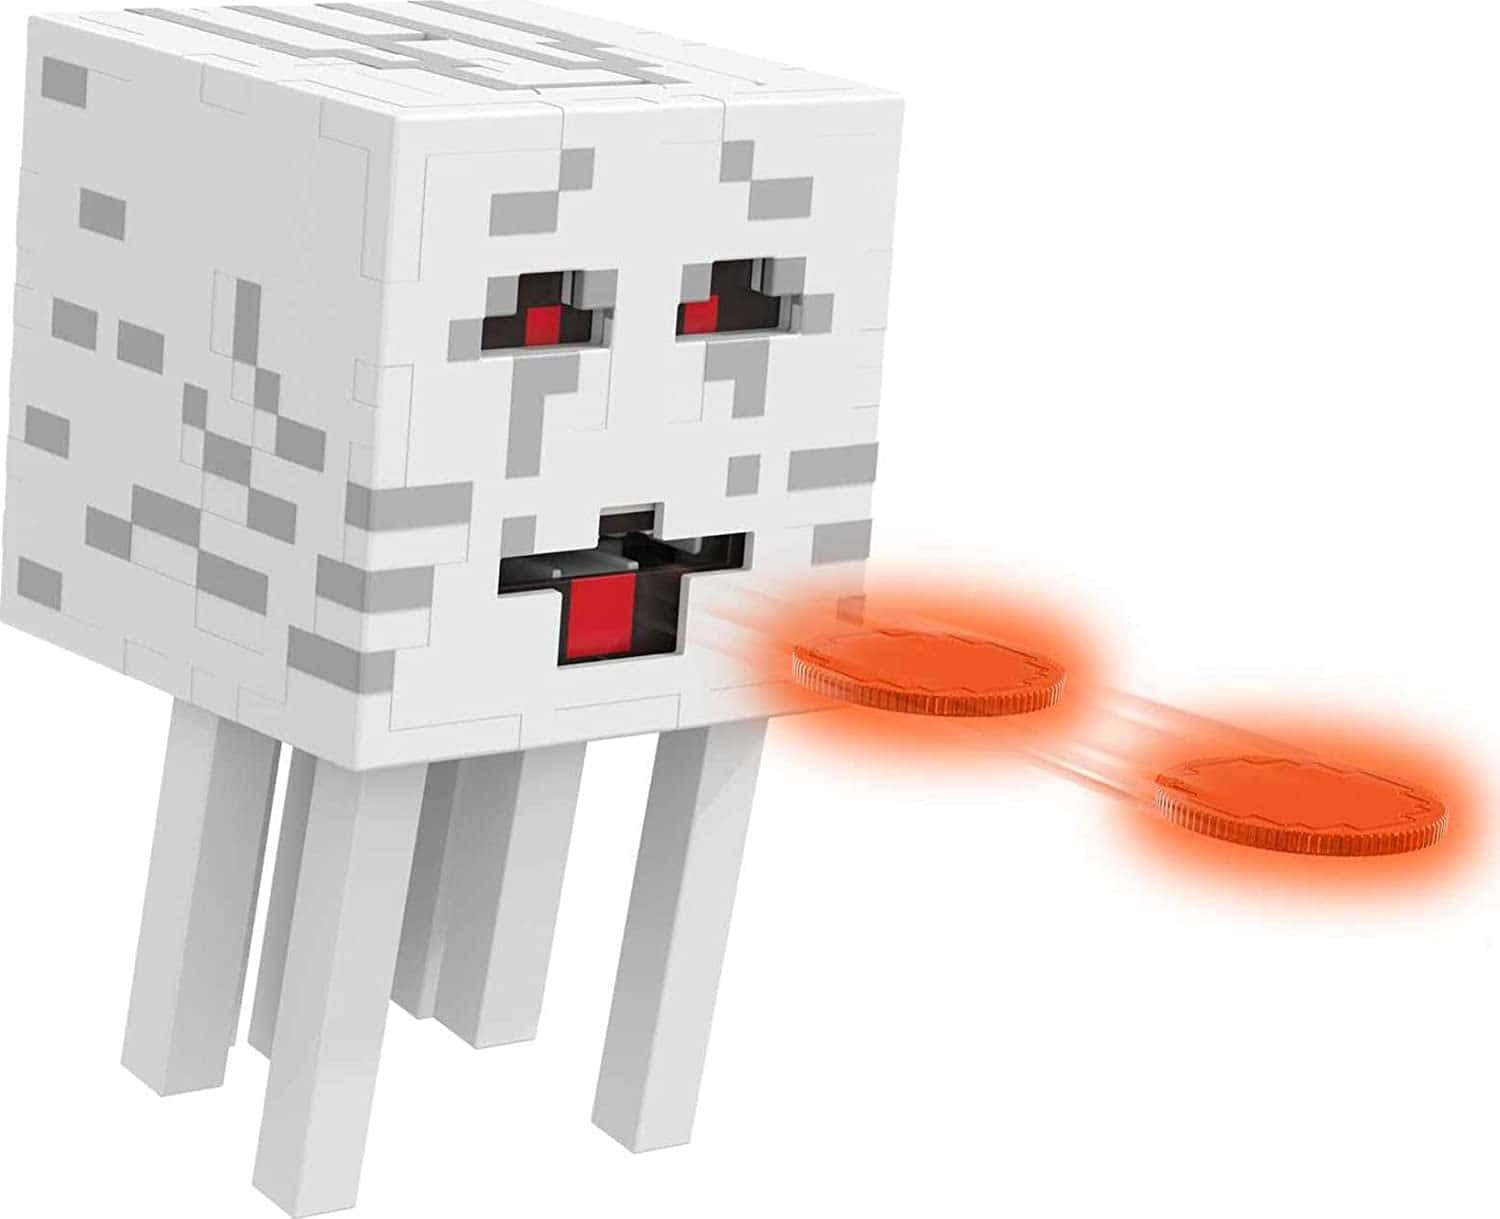 A terrifying Ghast hovering above in the Nether biome of Minecraft Wallpaper